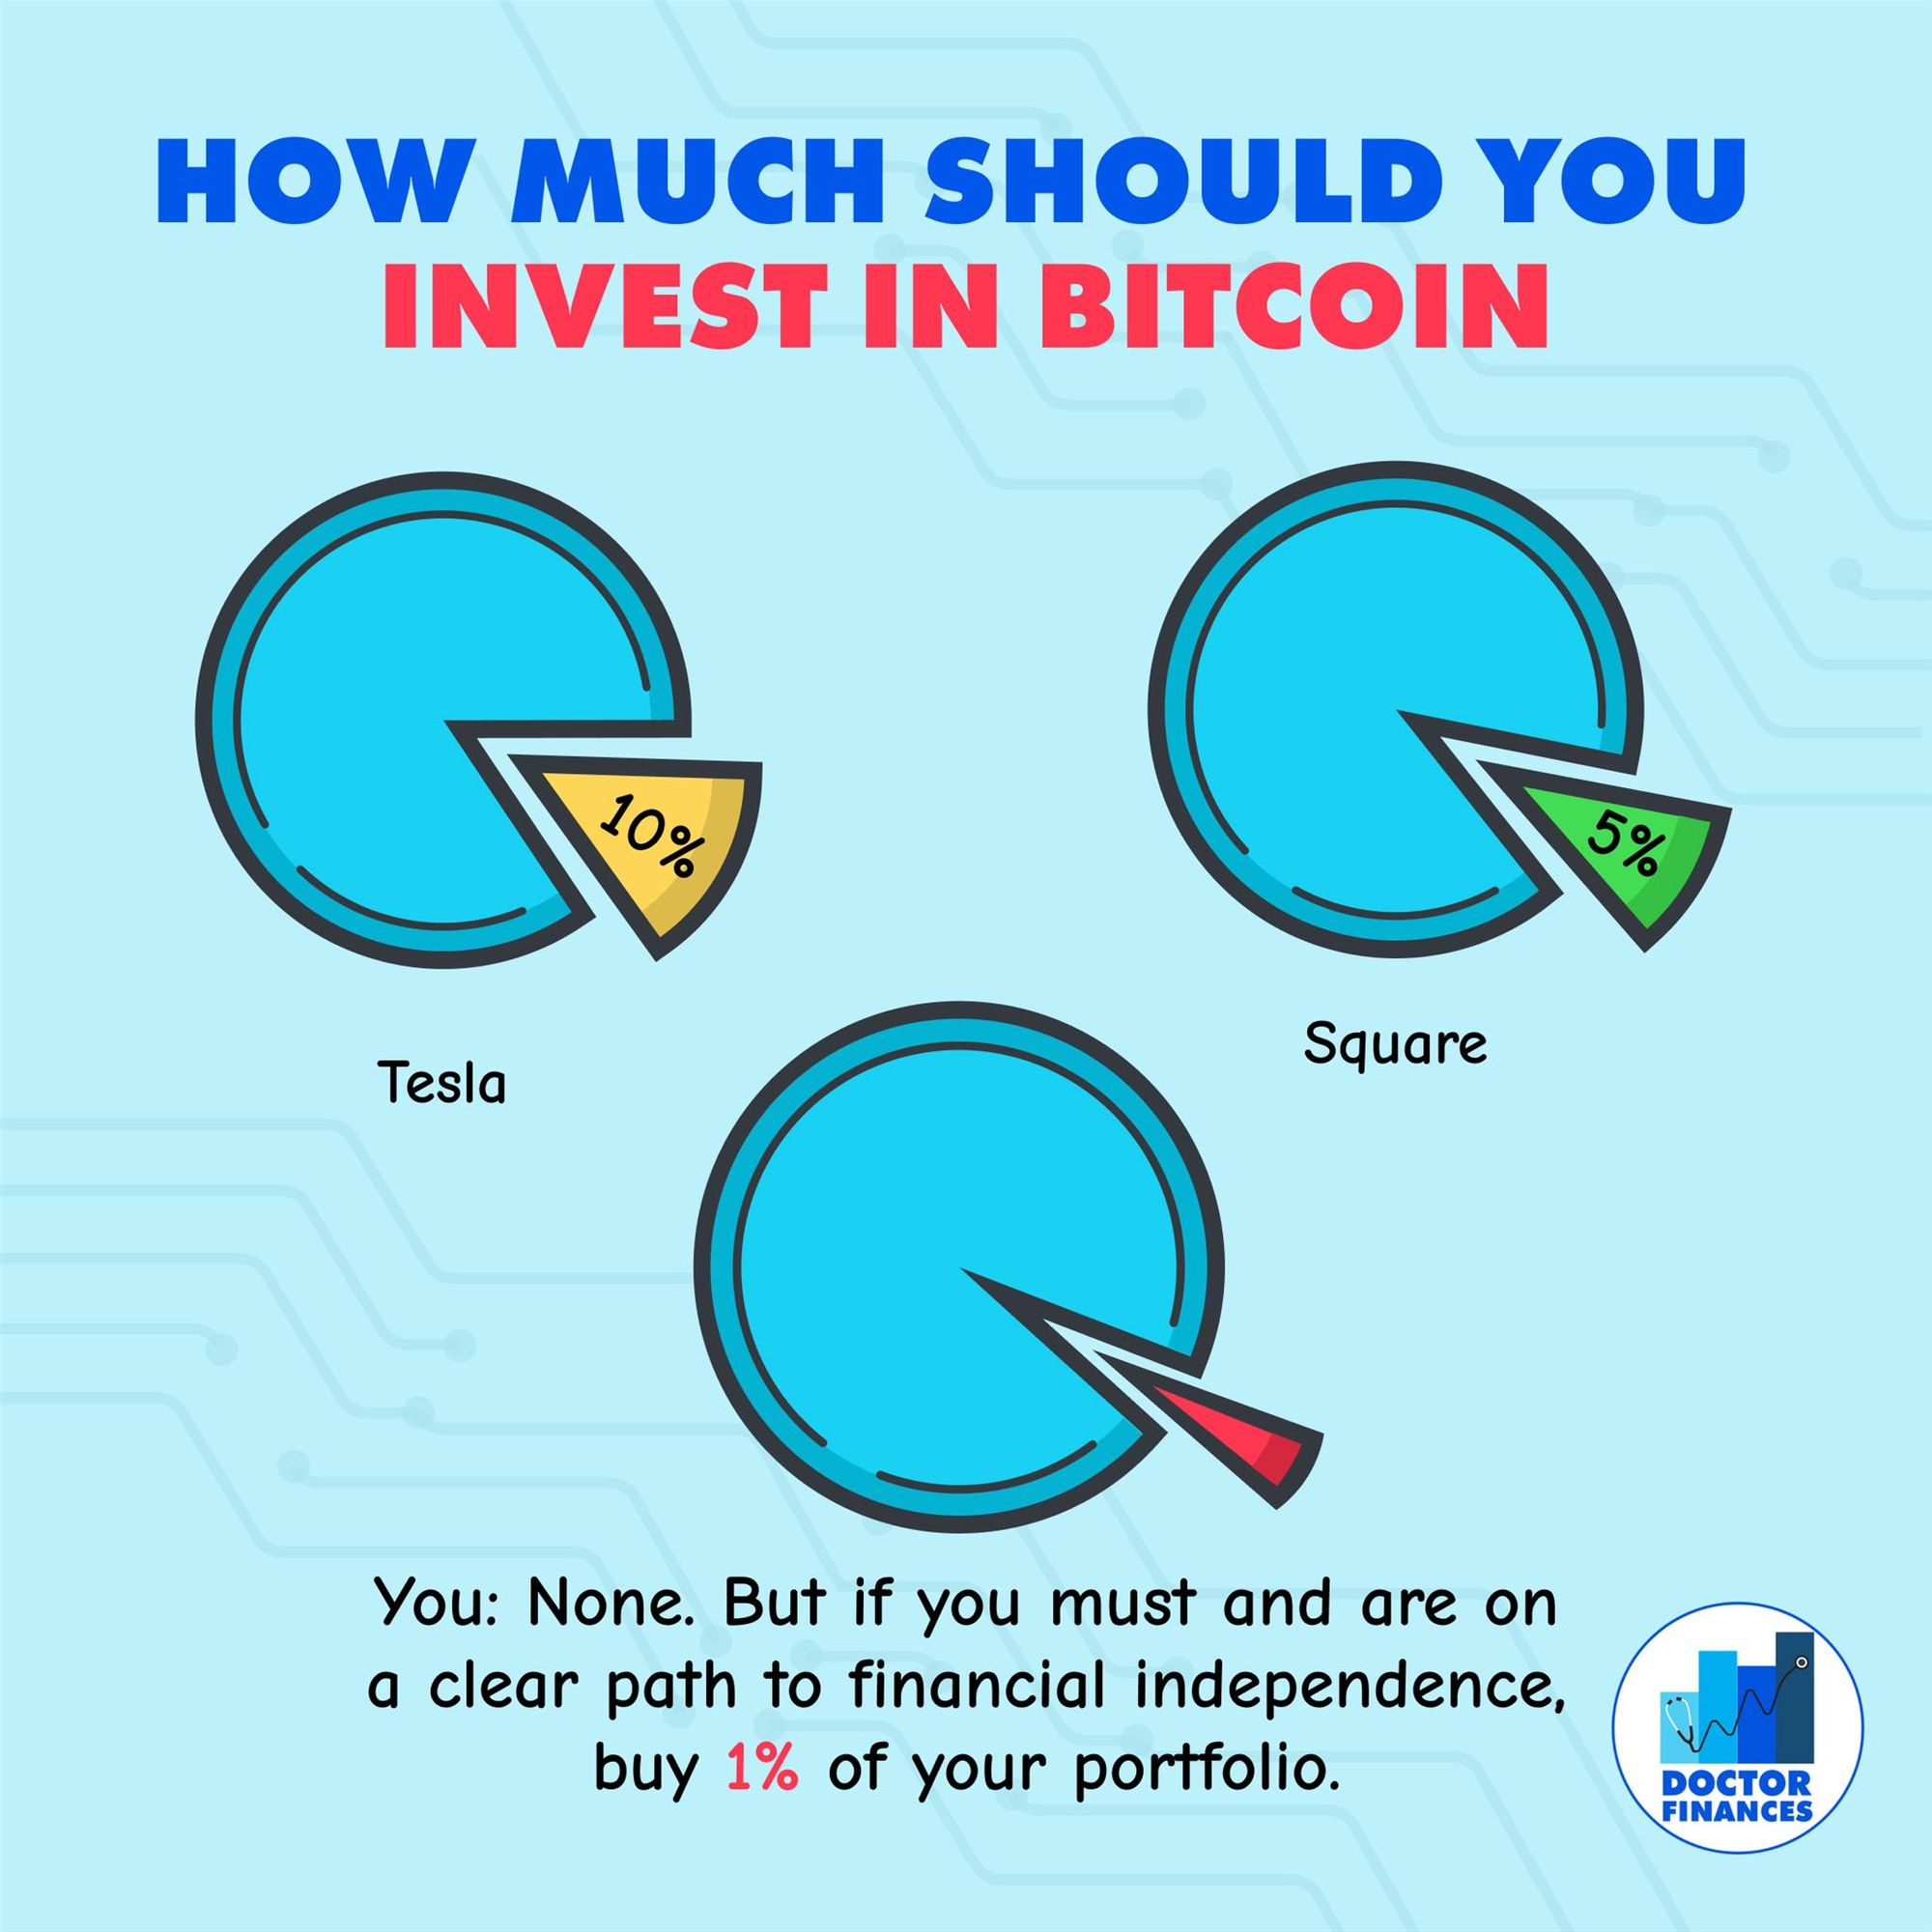 Here’s How You Can Invest in Bitcoins in India